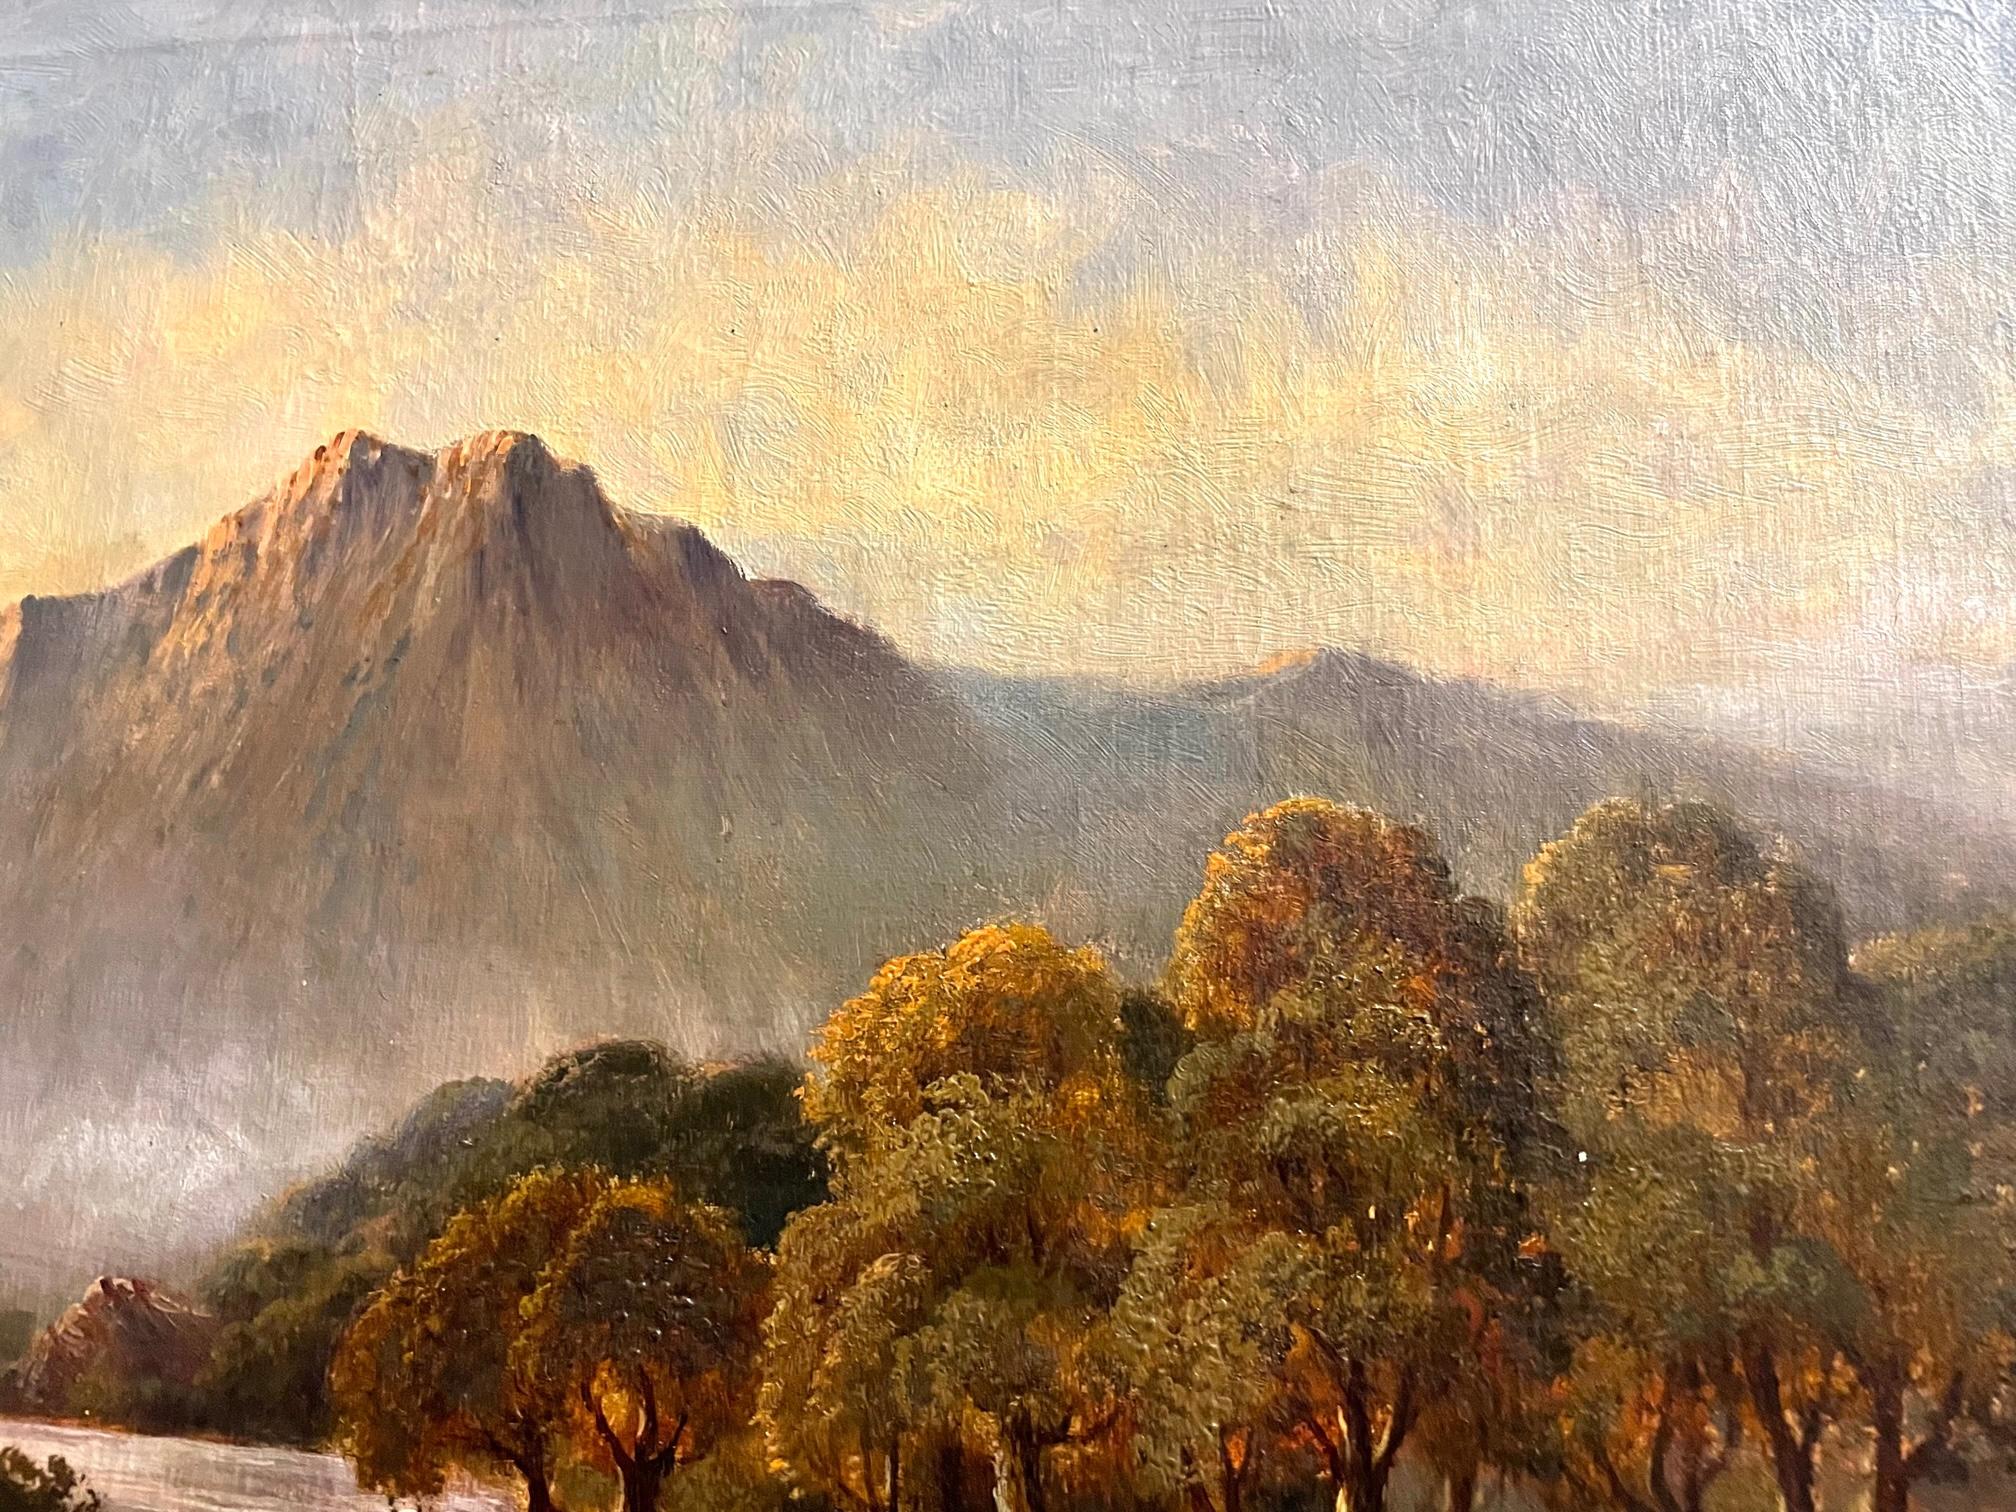 Crisply detailed mountain landscape with watering cattle, this early 20th century oil painting is by renowned landscape artist Daniel Sherrin (1868-1940).  Sherrin's work is distinctive for his short brush strokes and trees reflected in water in an